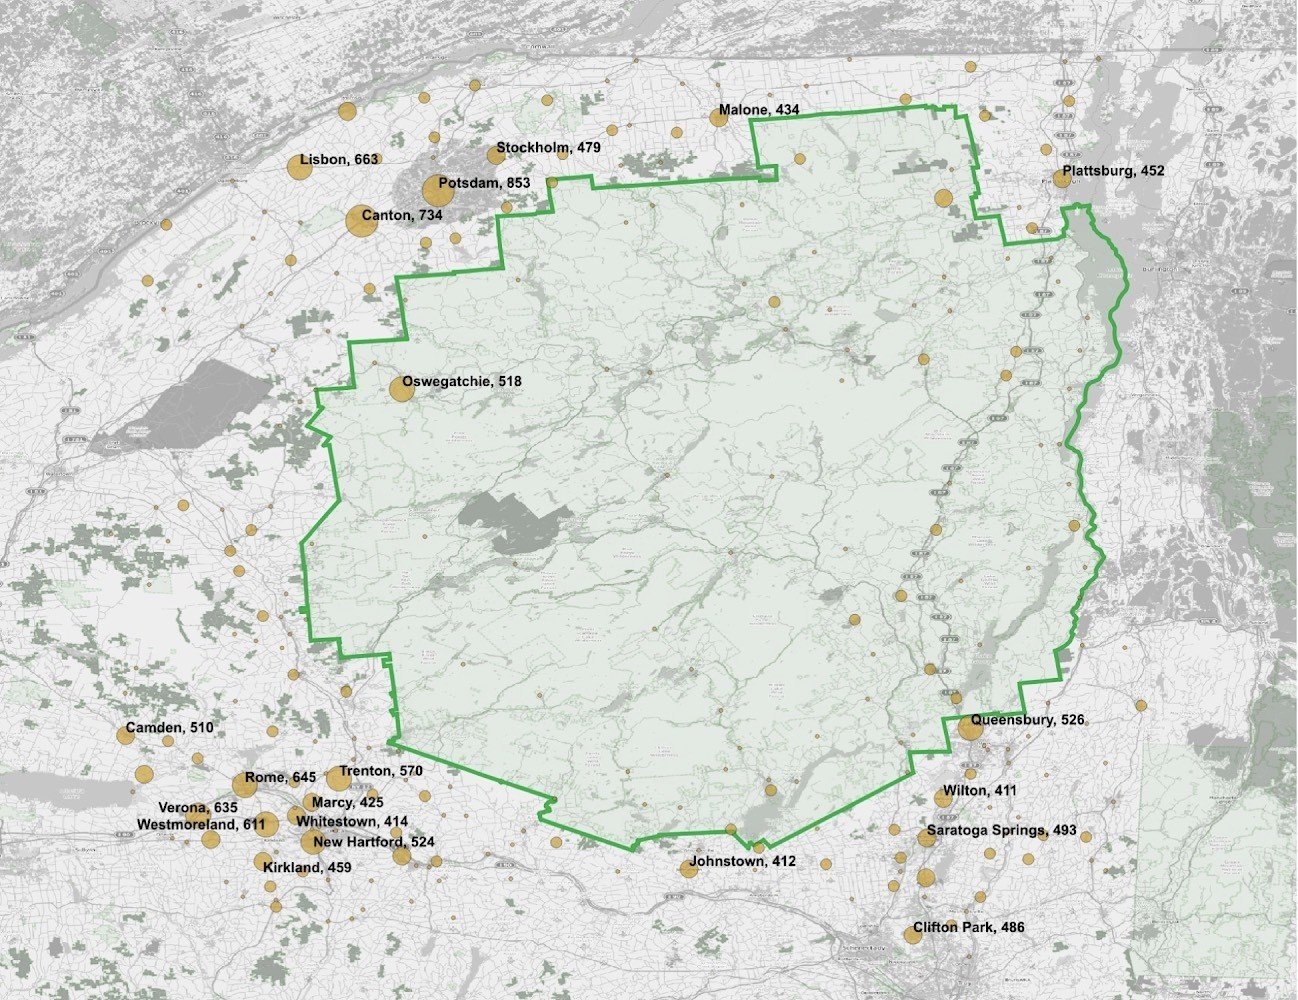 Figure 4: Animal-caused accidents by municipality for the 12 counties that contain part of Adirondacks Park, 2009-2018. Data compiled from ITSR and plotted via QGIS. Park boundary is denoted by the green line © Kevin Webb